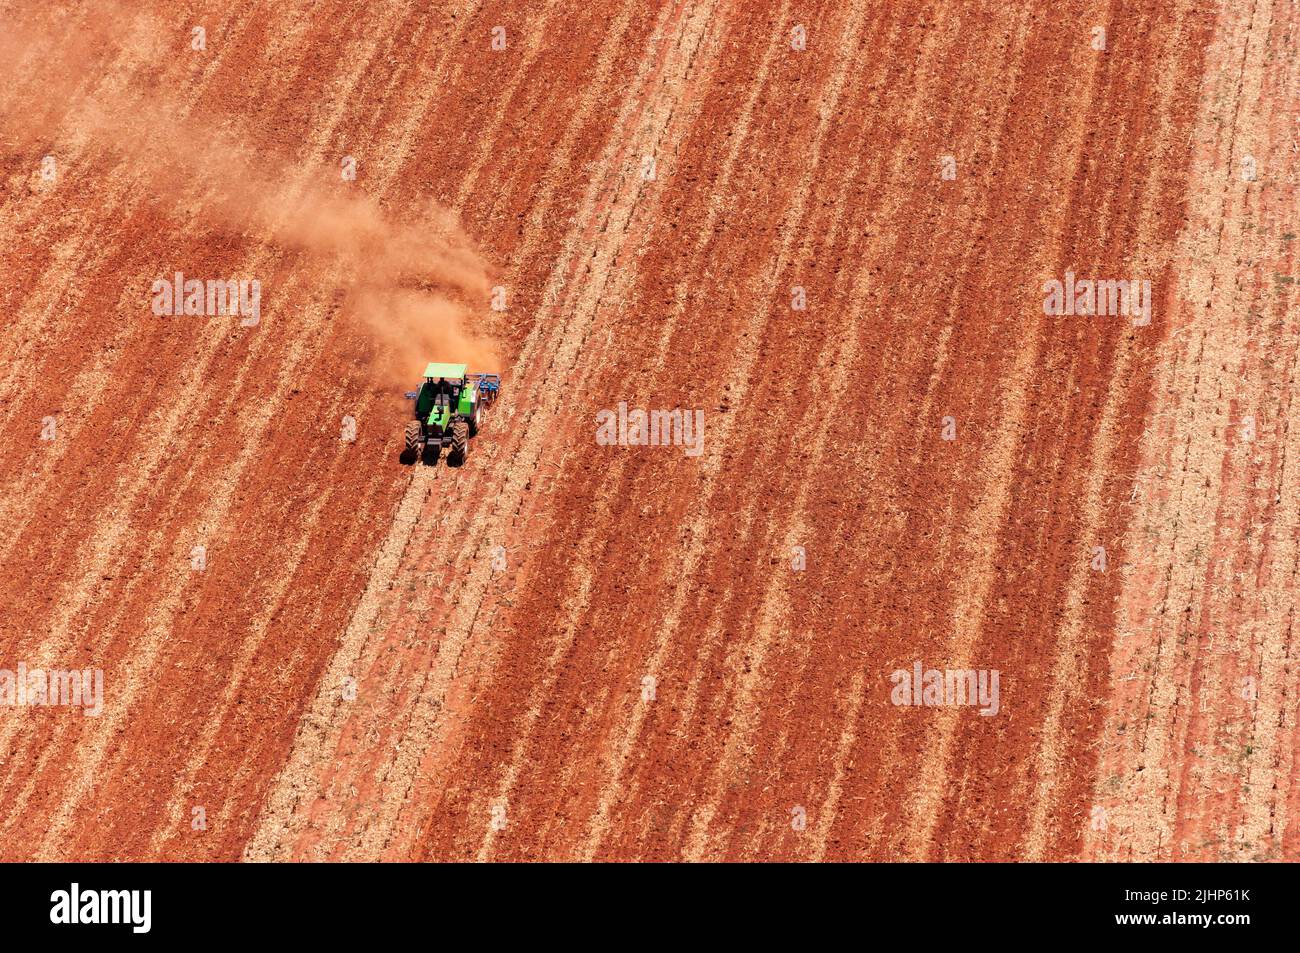 A photograph of a tractor ploughing on a farm in central Namibia. Stock Photo